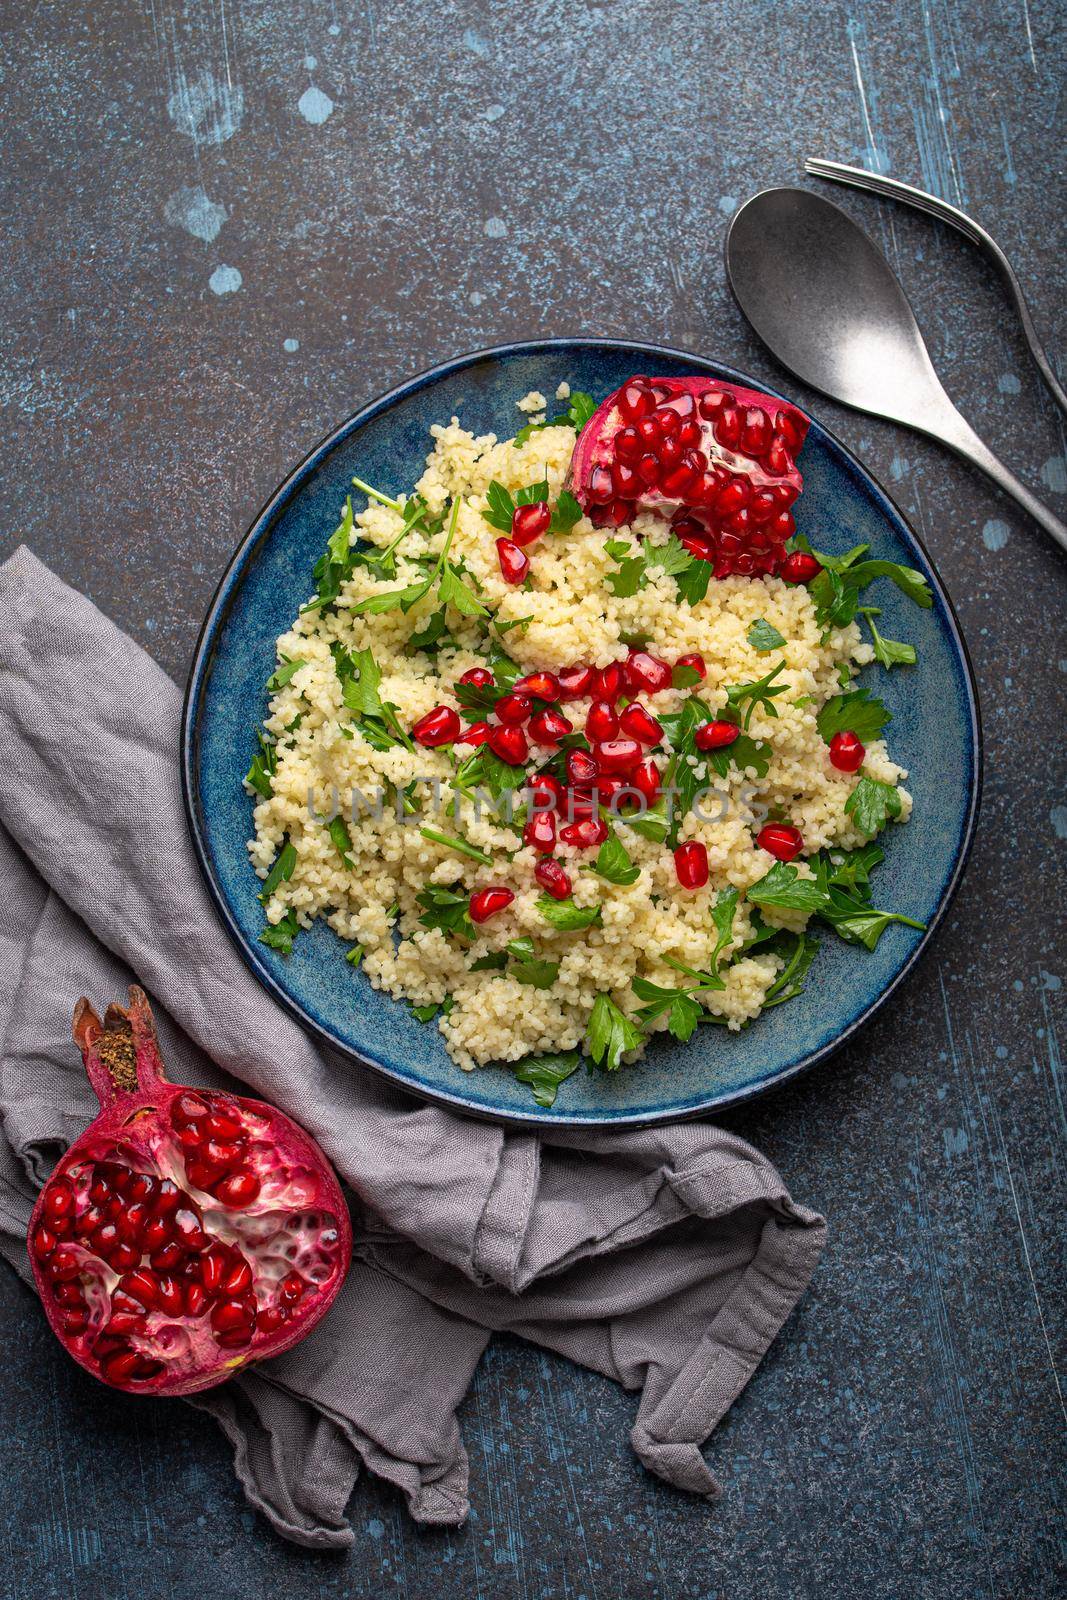 Bright colourful couscous or bulgur salad with pomegranate seeds Tabbouleh in rustic blue ceramic bowl top view on concrete background, traditional middle eastern or arab dish.